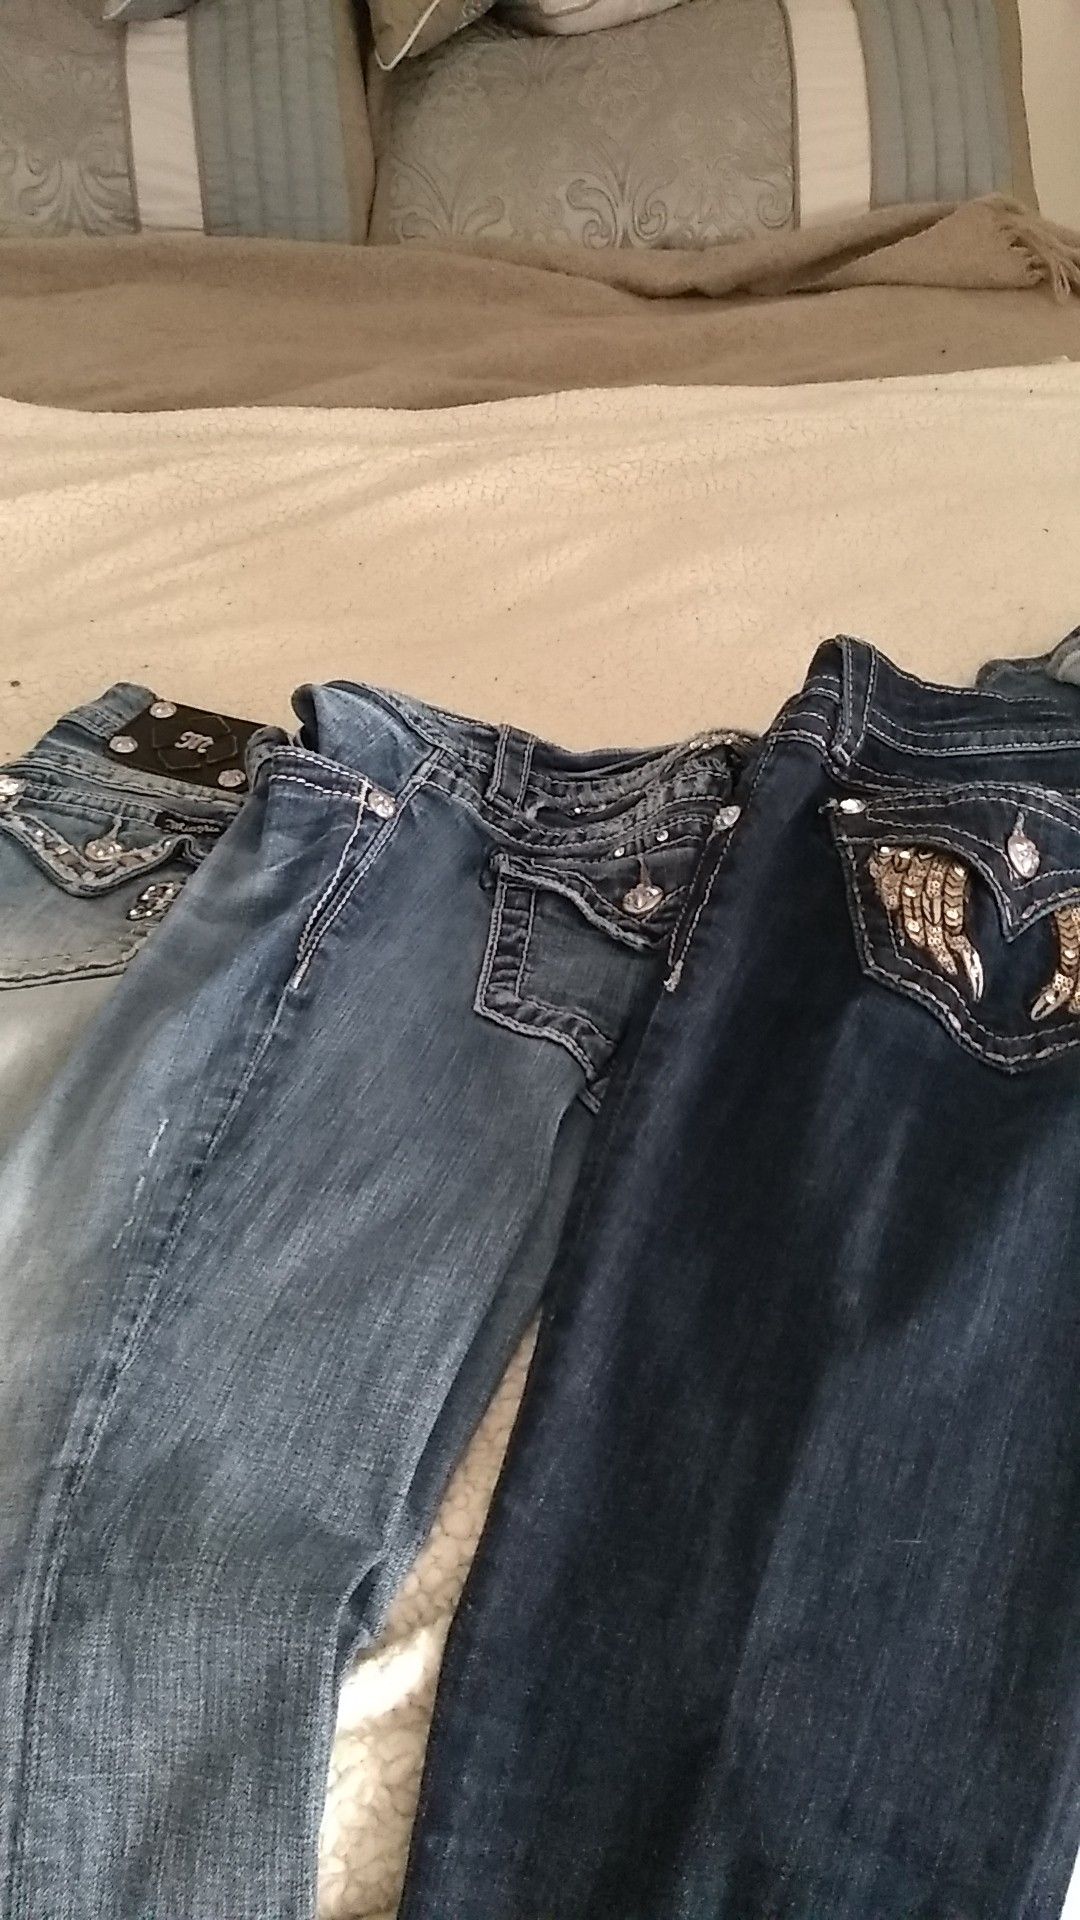 Three pair of Miss me jeans and good condition two pair long and one pair is capris size 25 one pair is 40 and the other two pair are 25 each